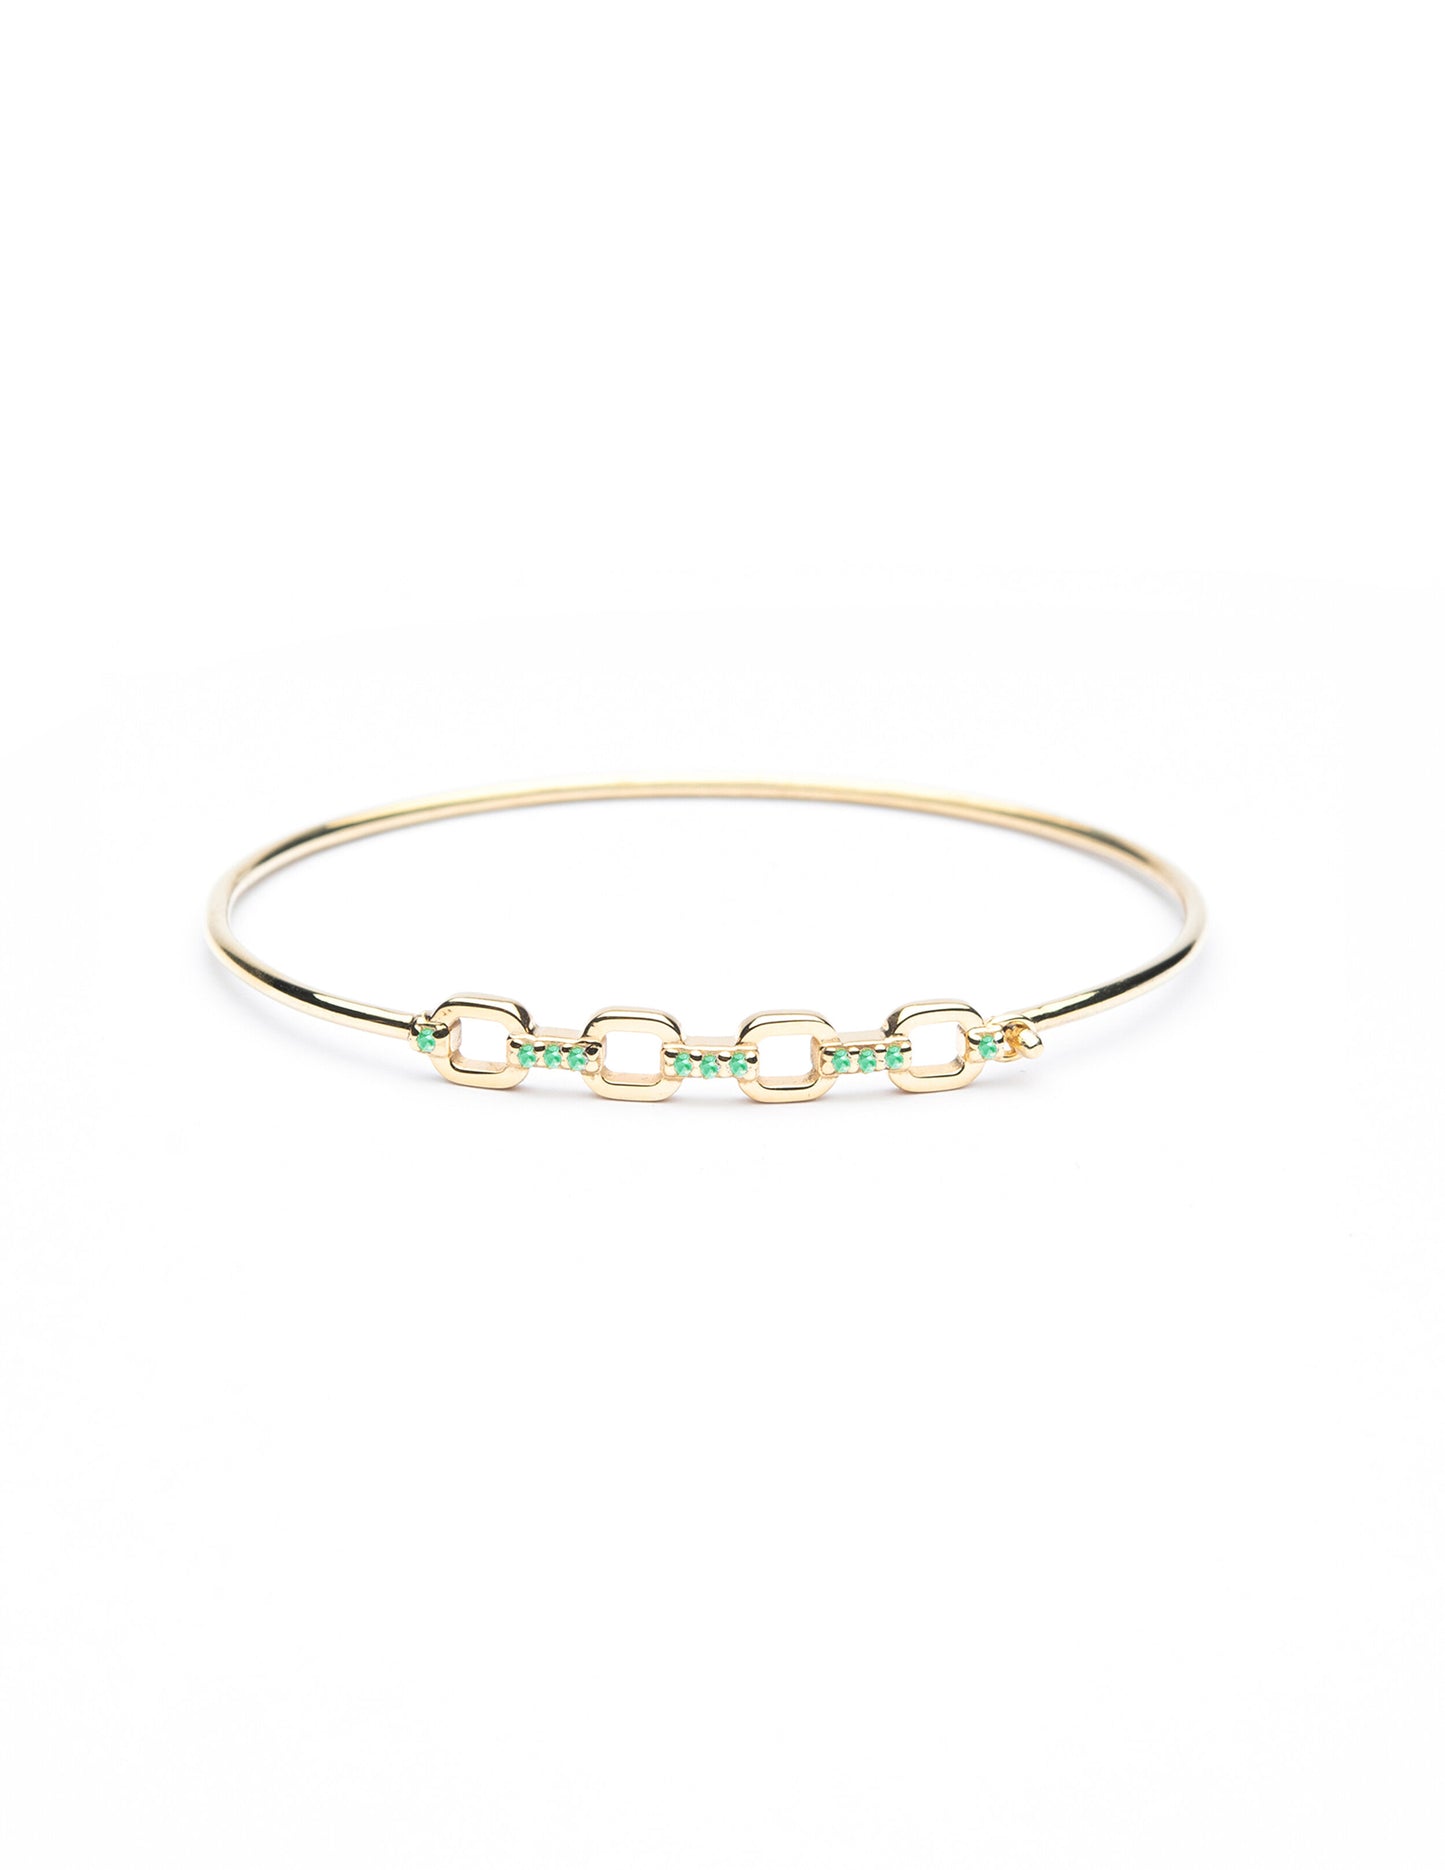 Emerald Chain Bracelet - Gold Plated